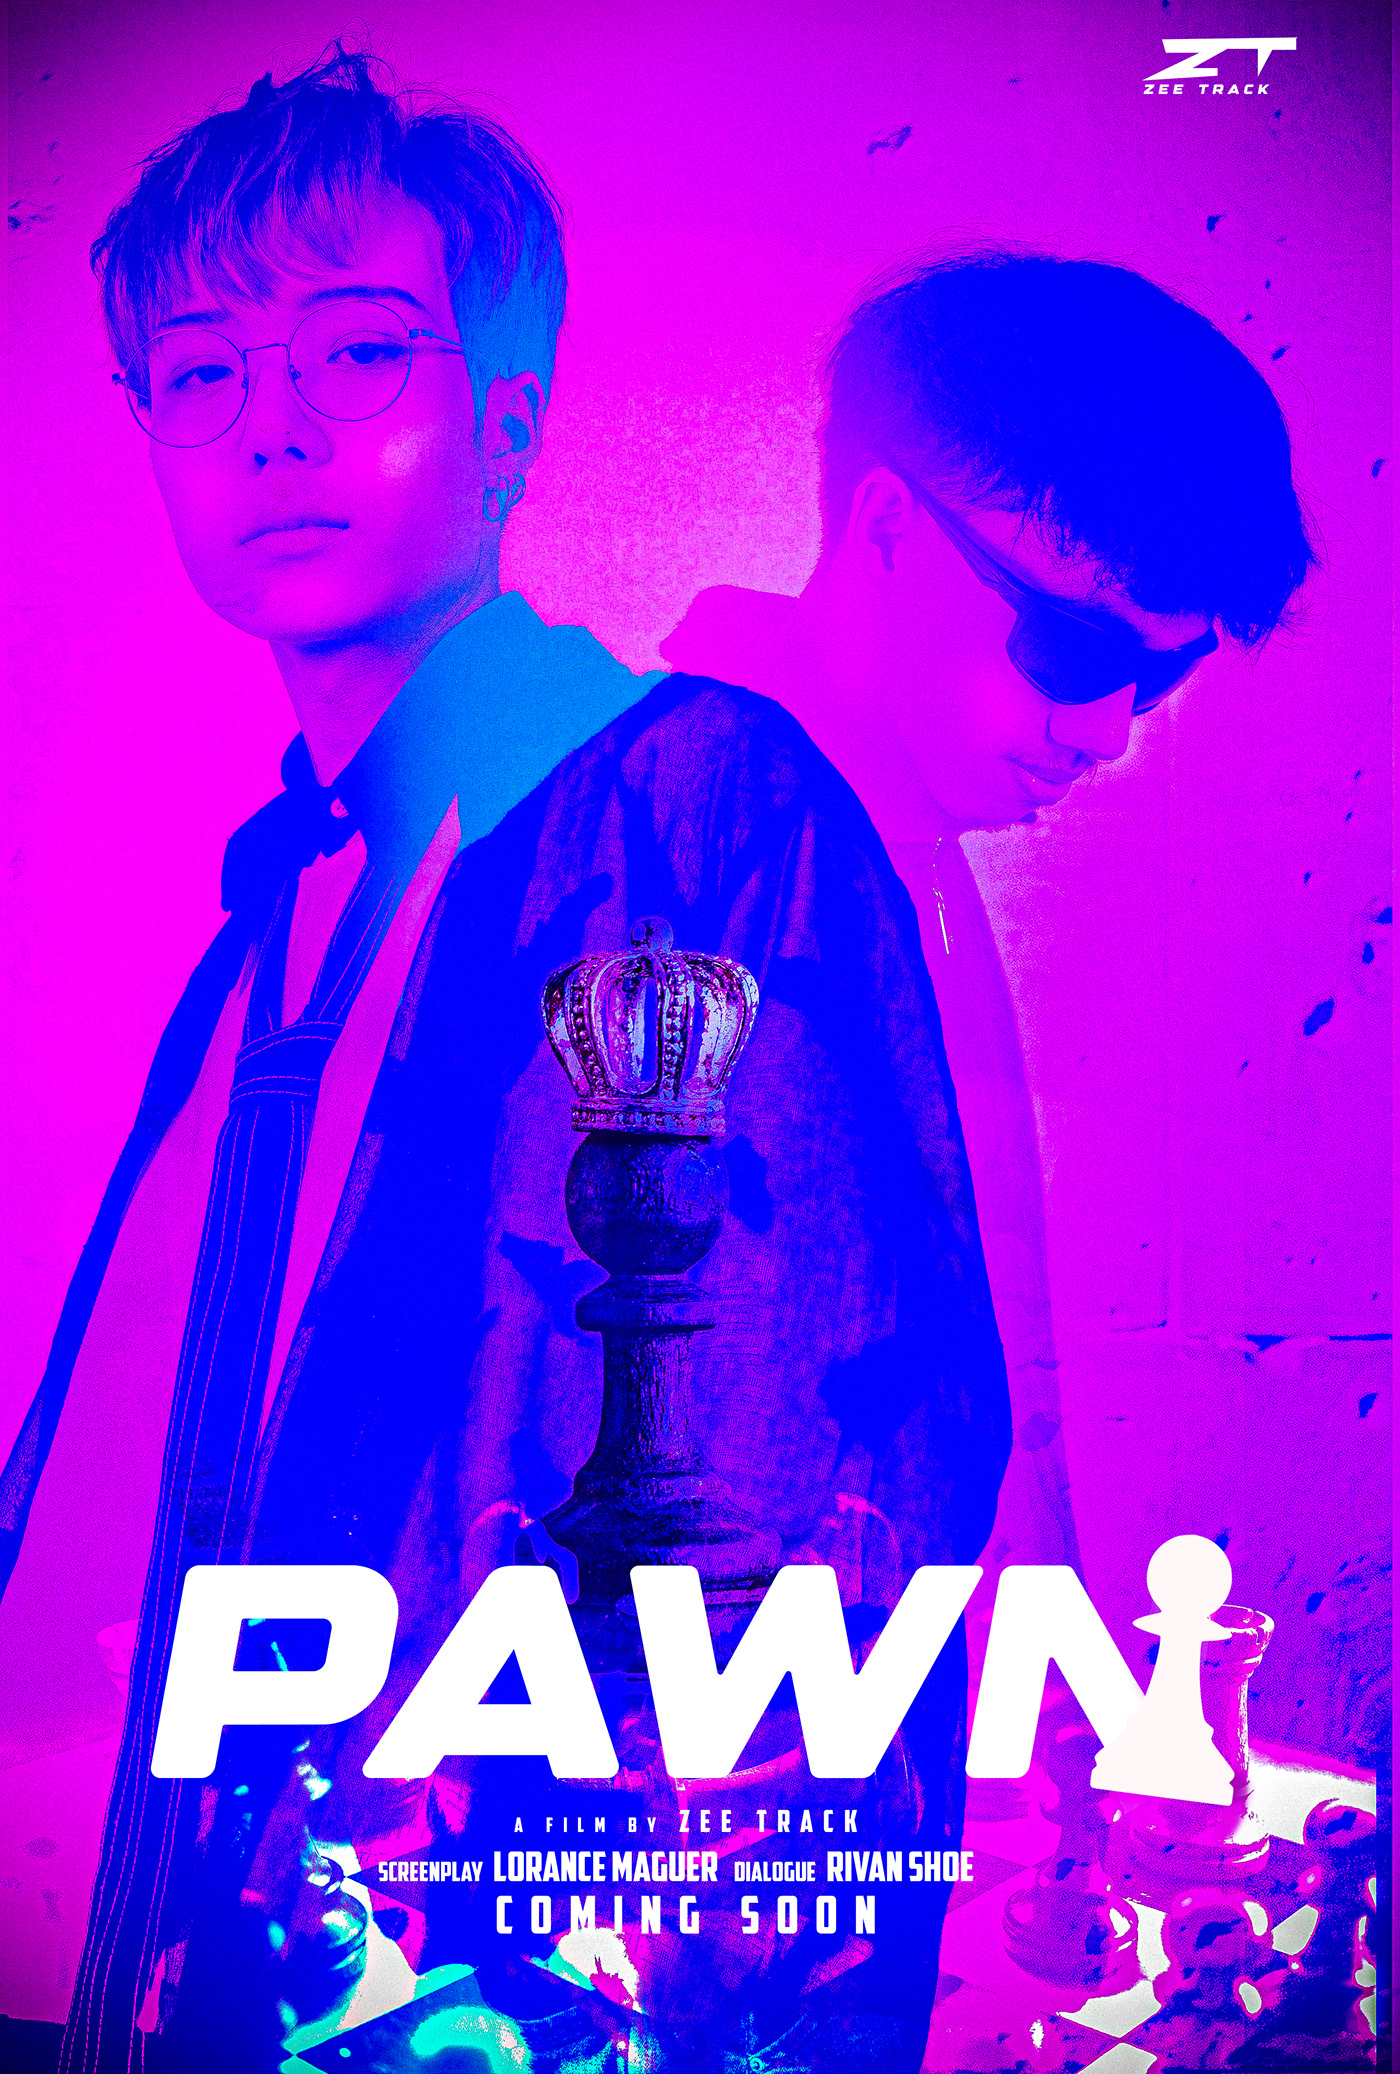 poster Social media post movie poster Cyberpunk chess blue and pink Movies Film   manipulation